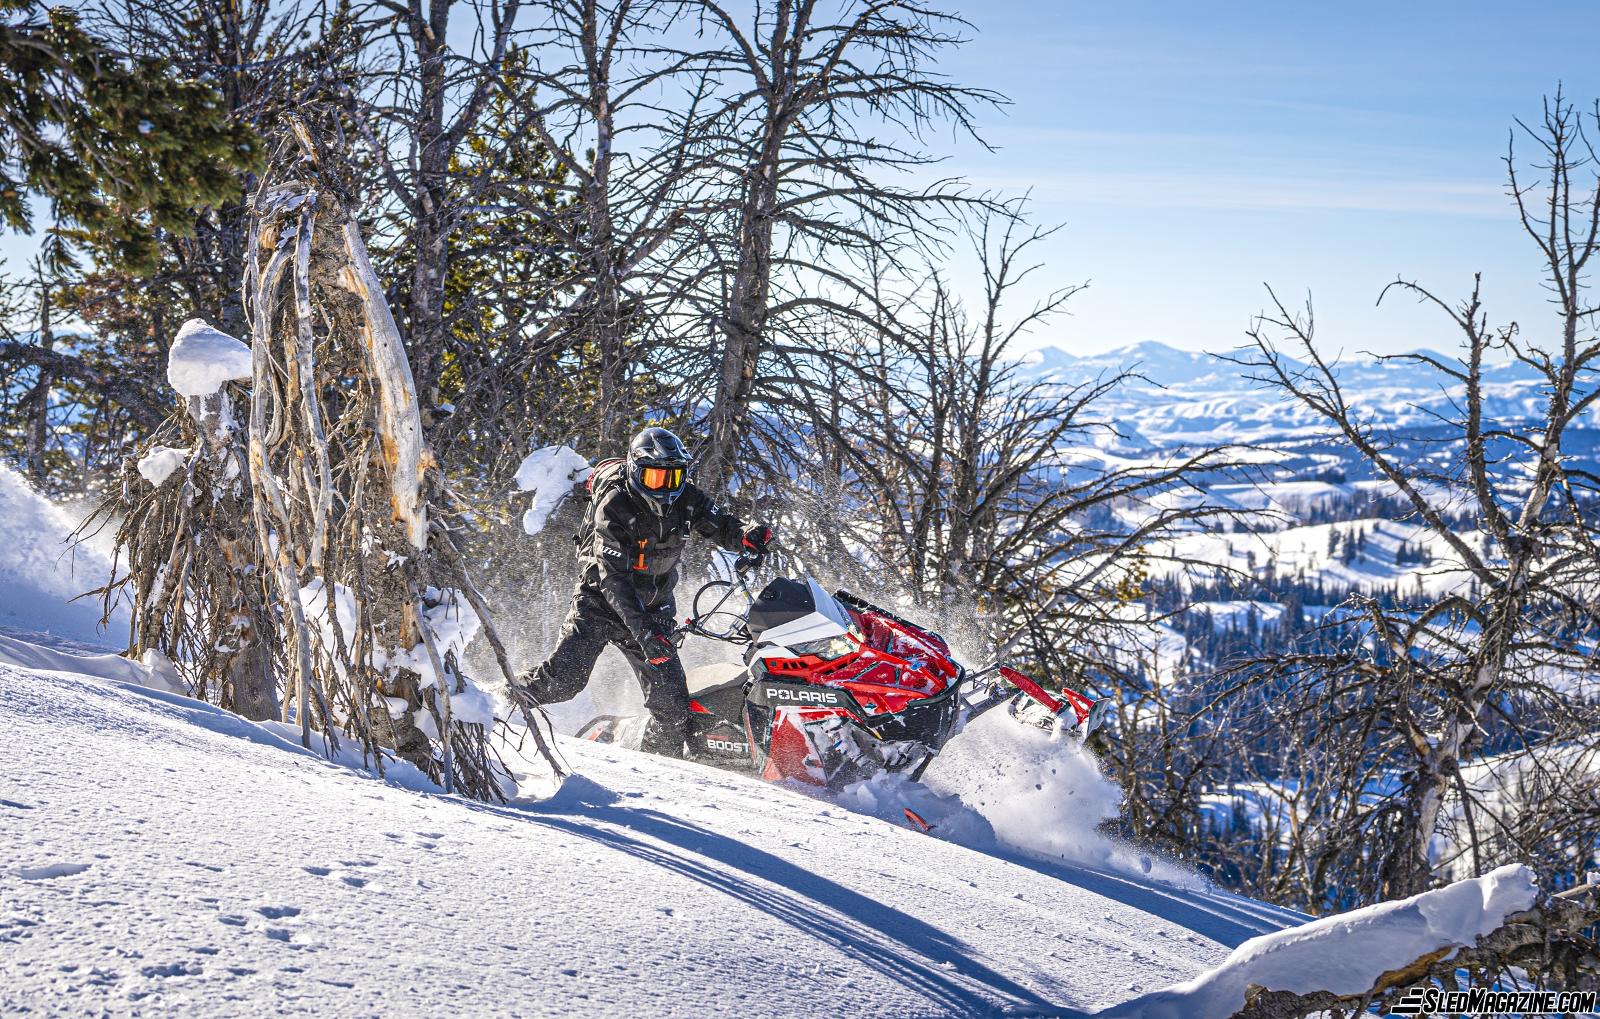 More power in the mountains for the 2022 Polaris snowmobile